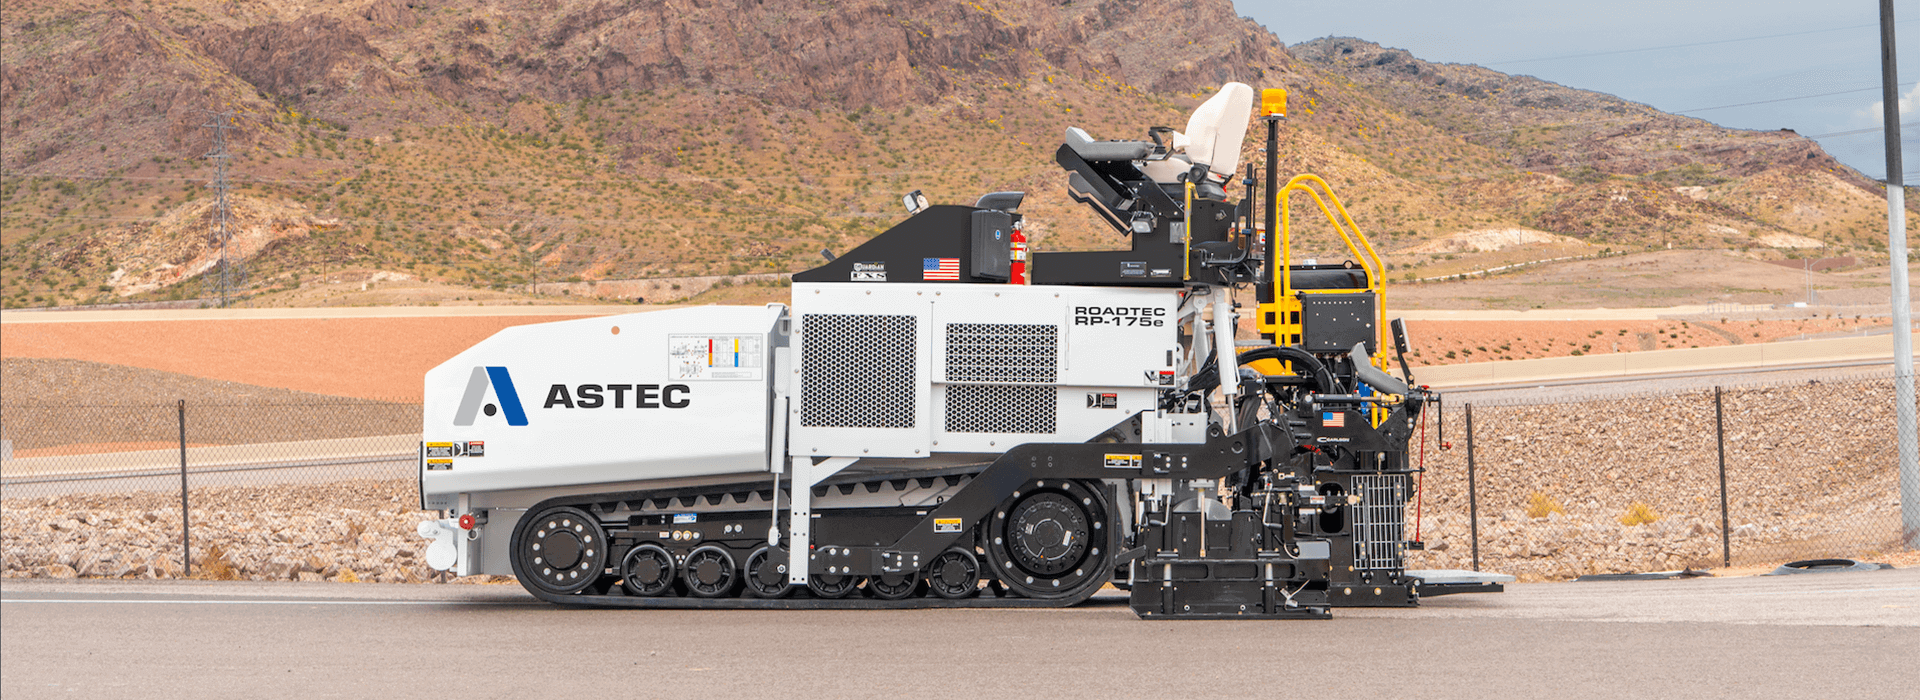 Roadtec RP-175 highway class asphalt paver on road with mountains in the background